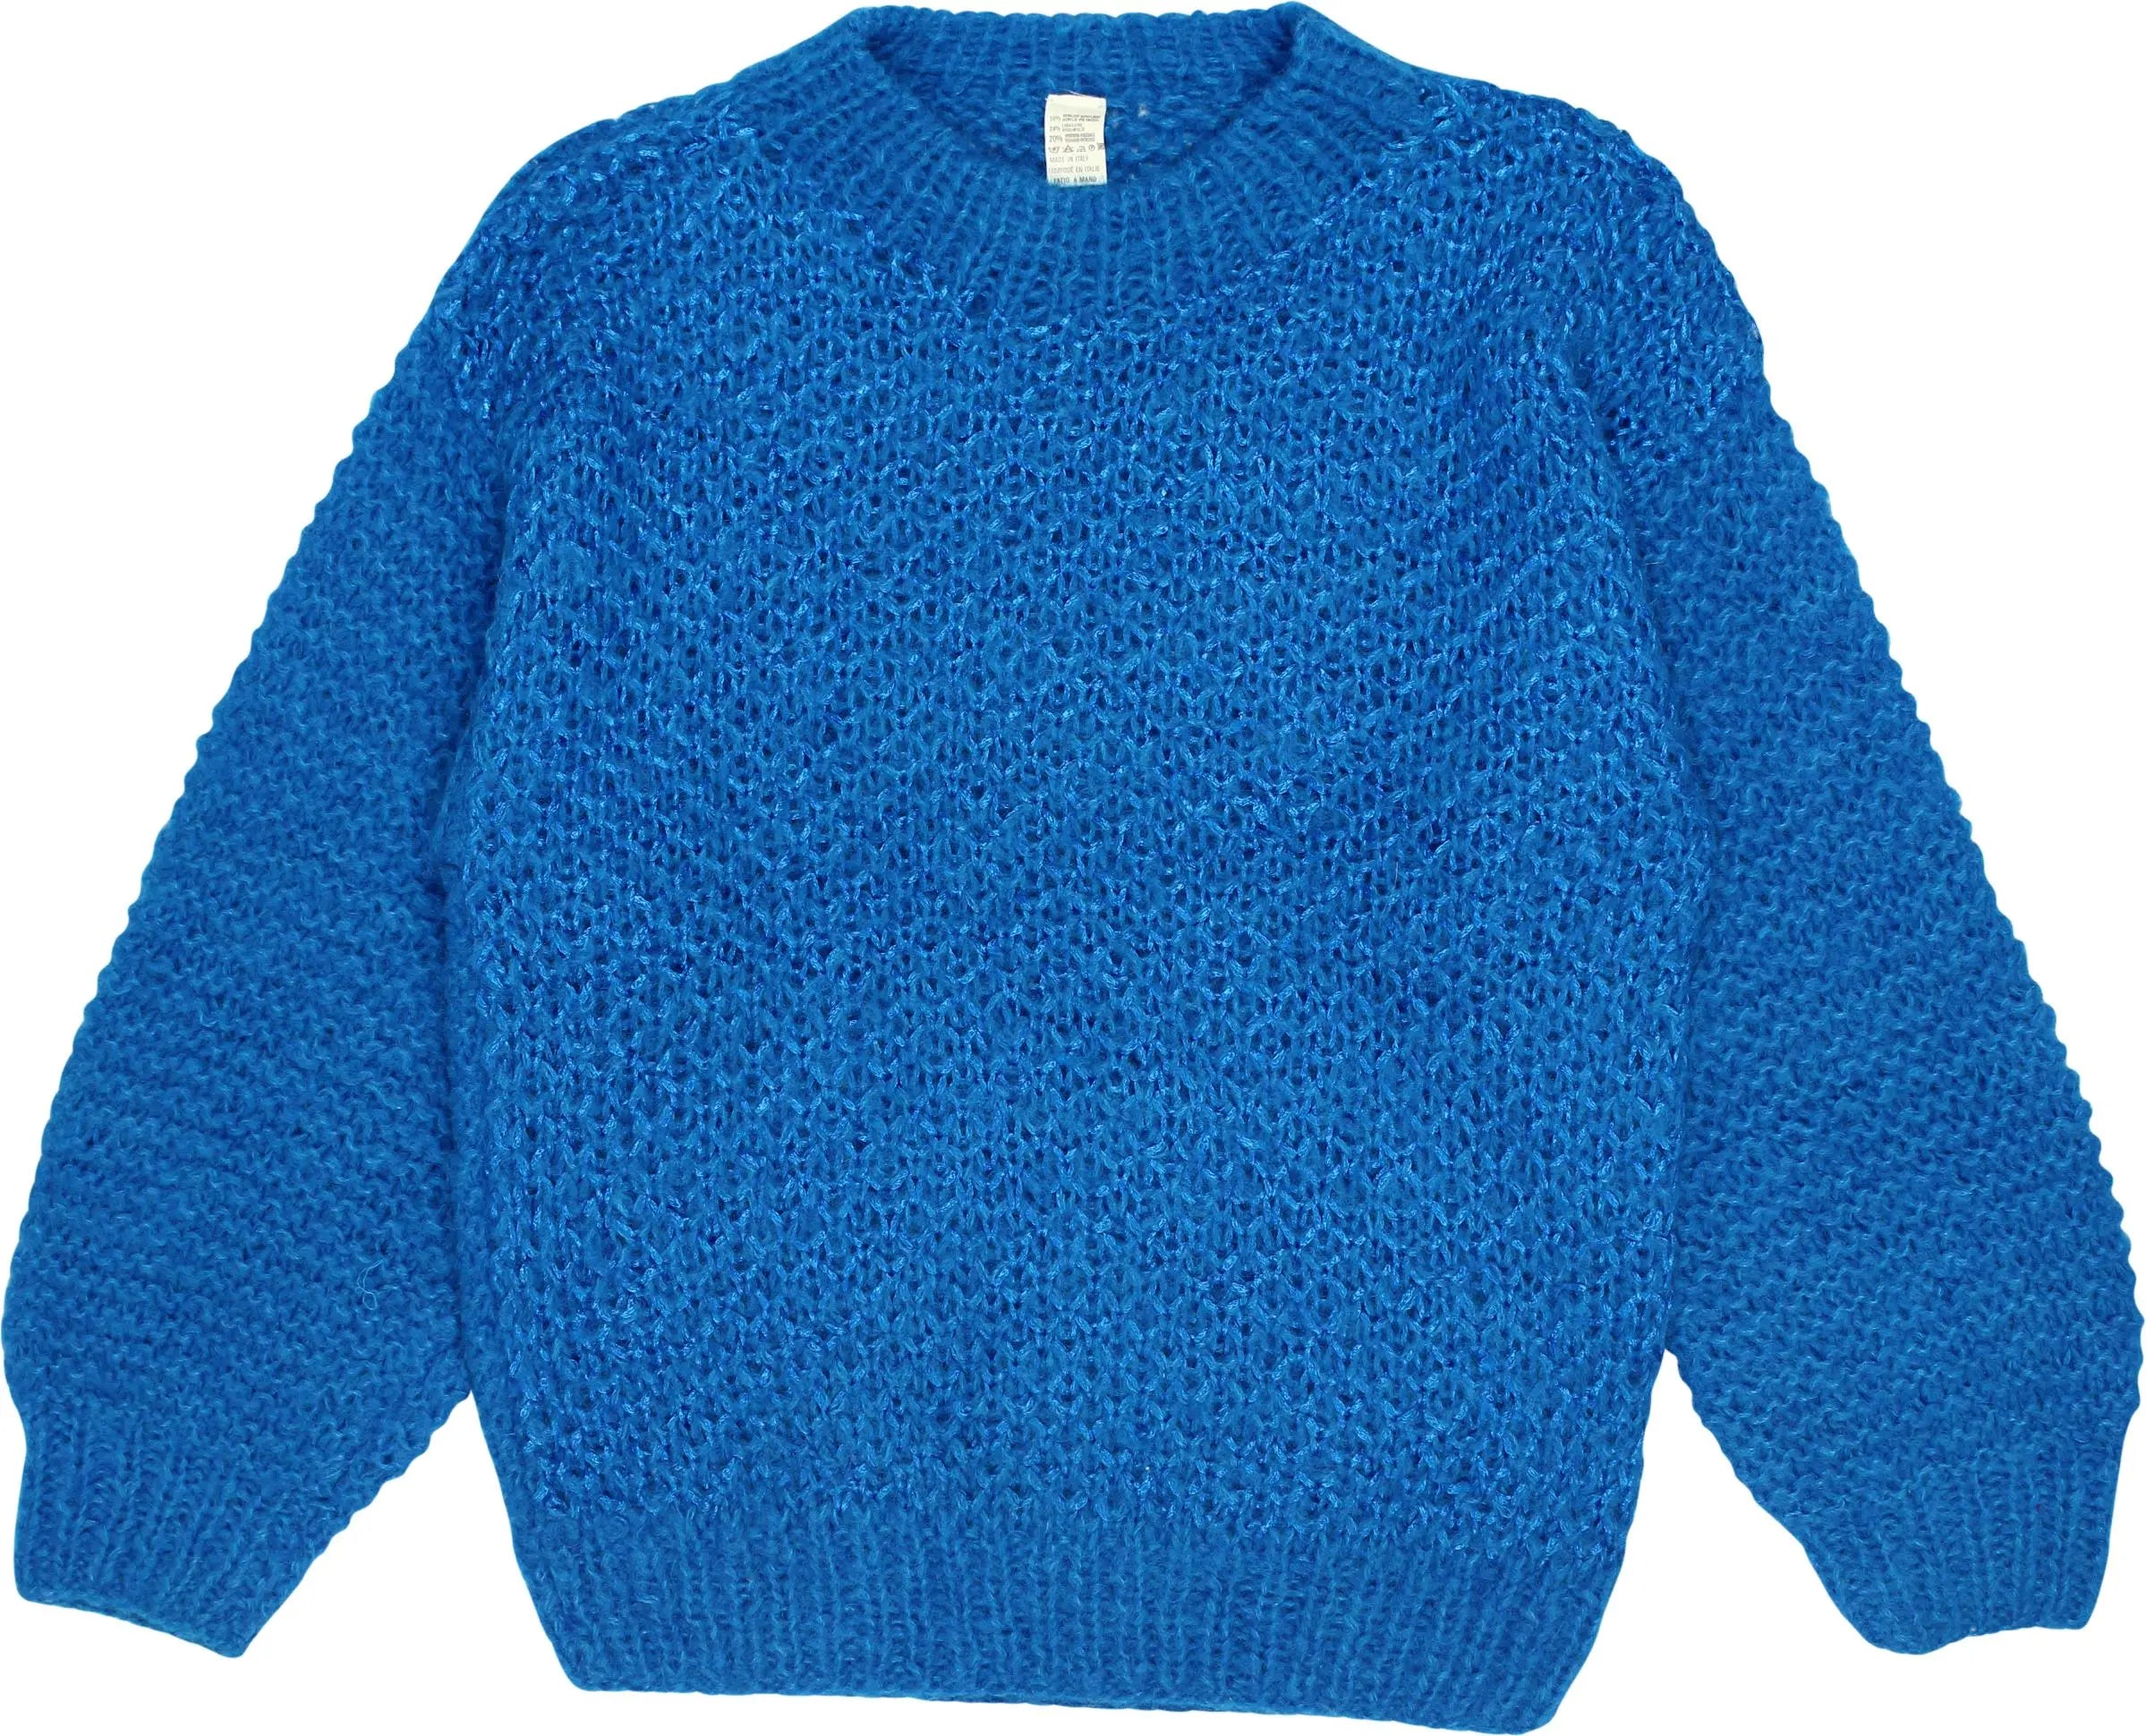 Unknown - Wool Blend Knitted Jumper- ThriftTale.com - Vintage and second handclothing